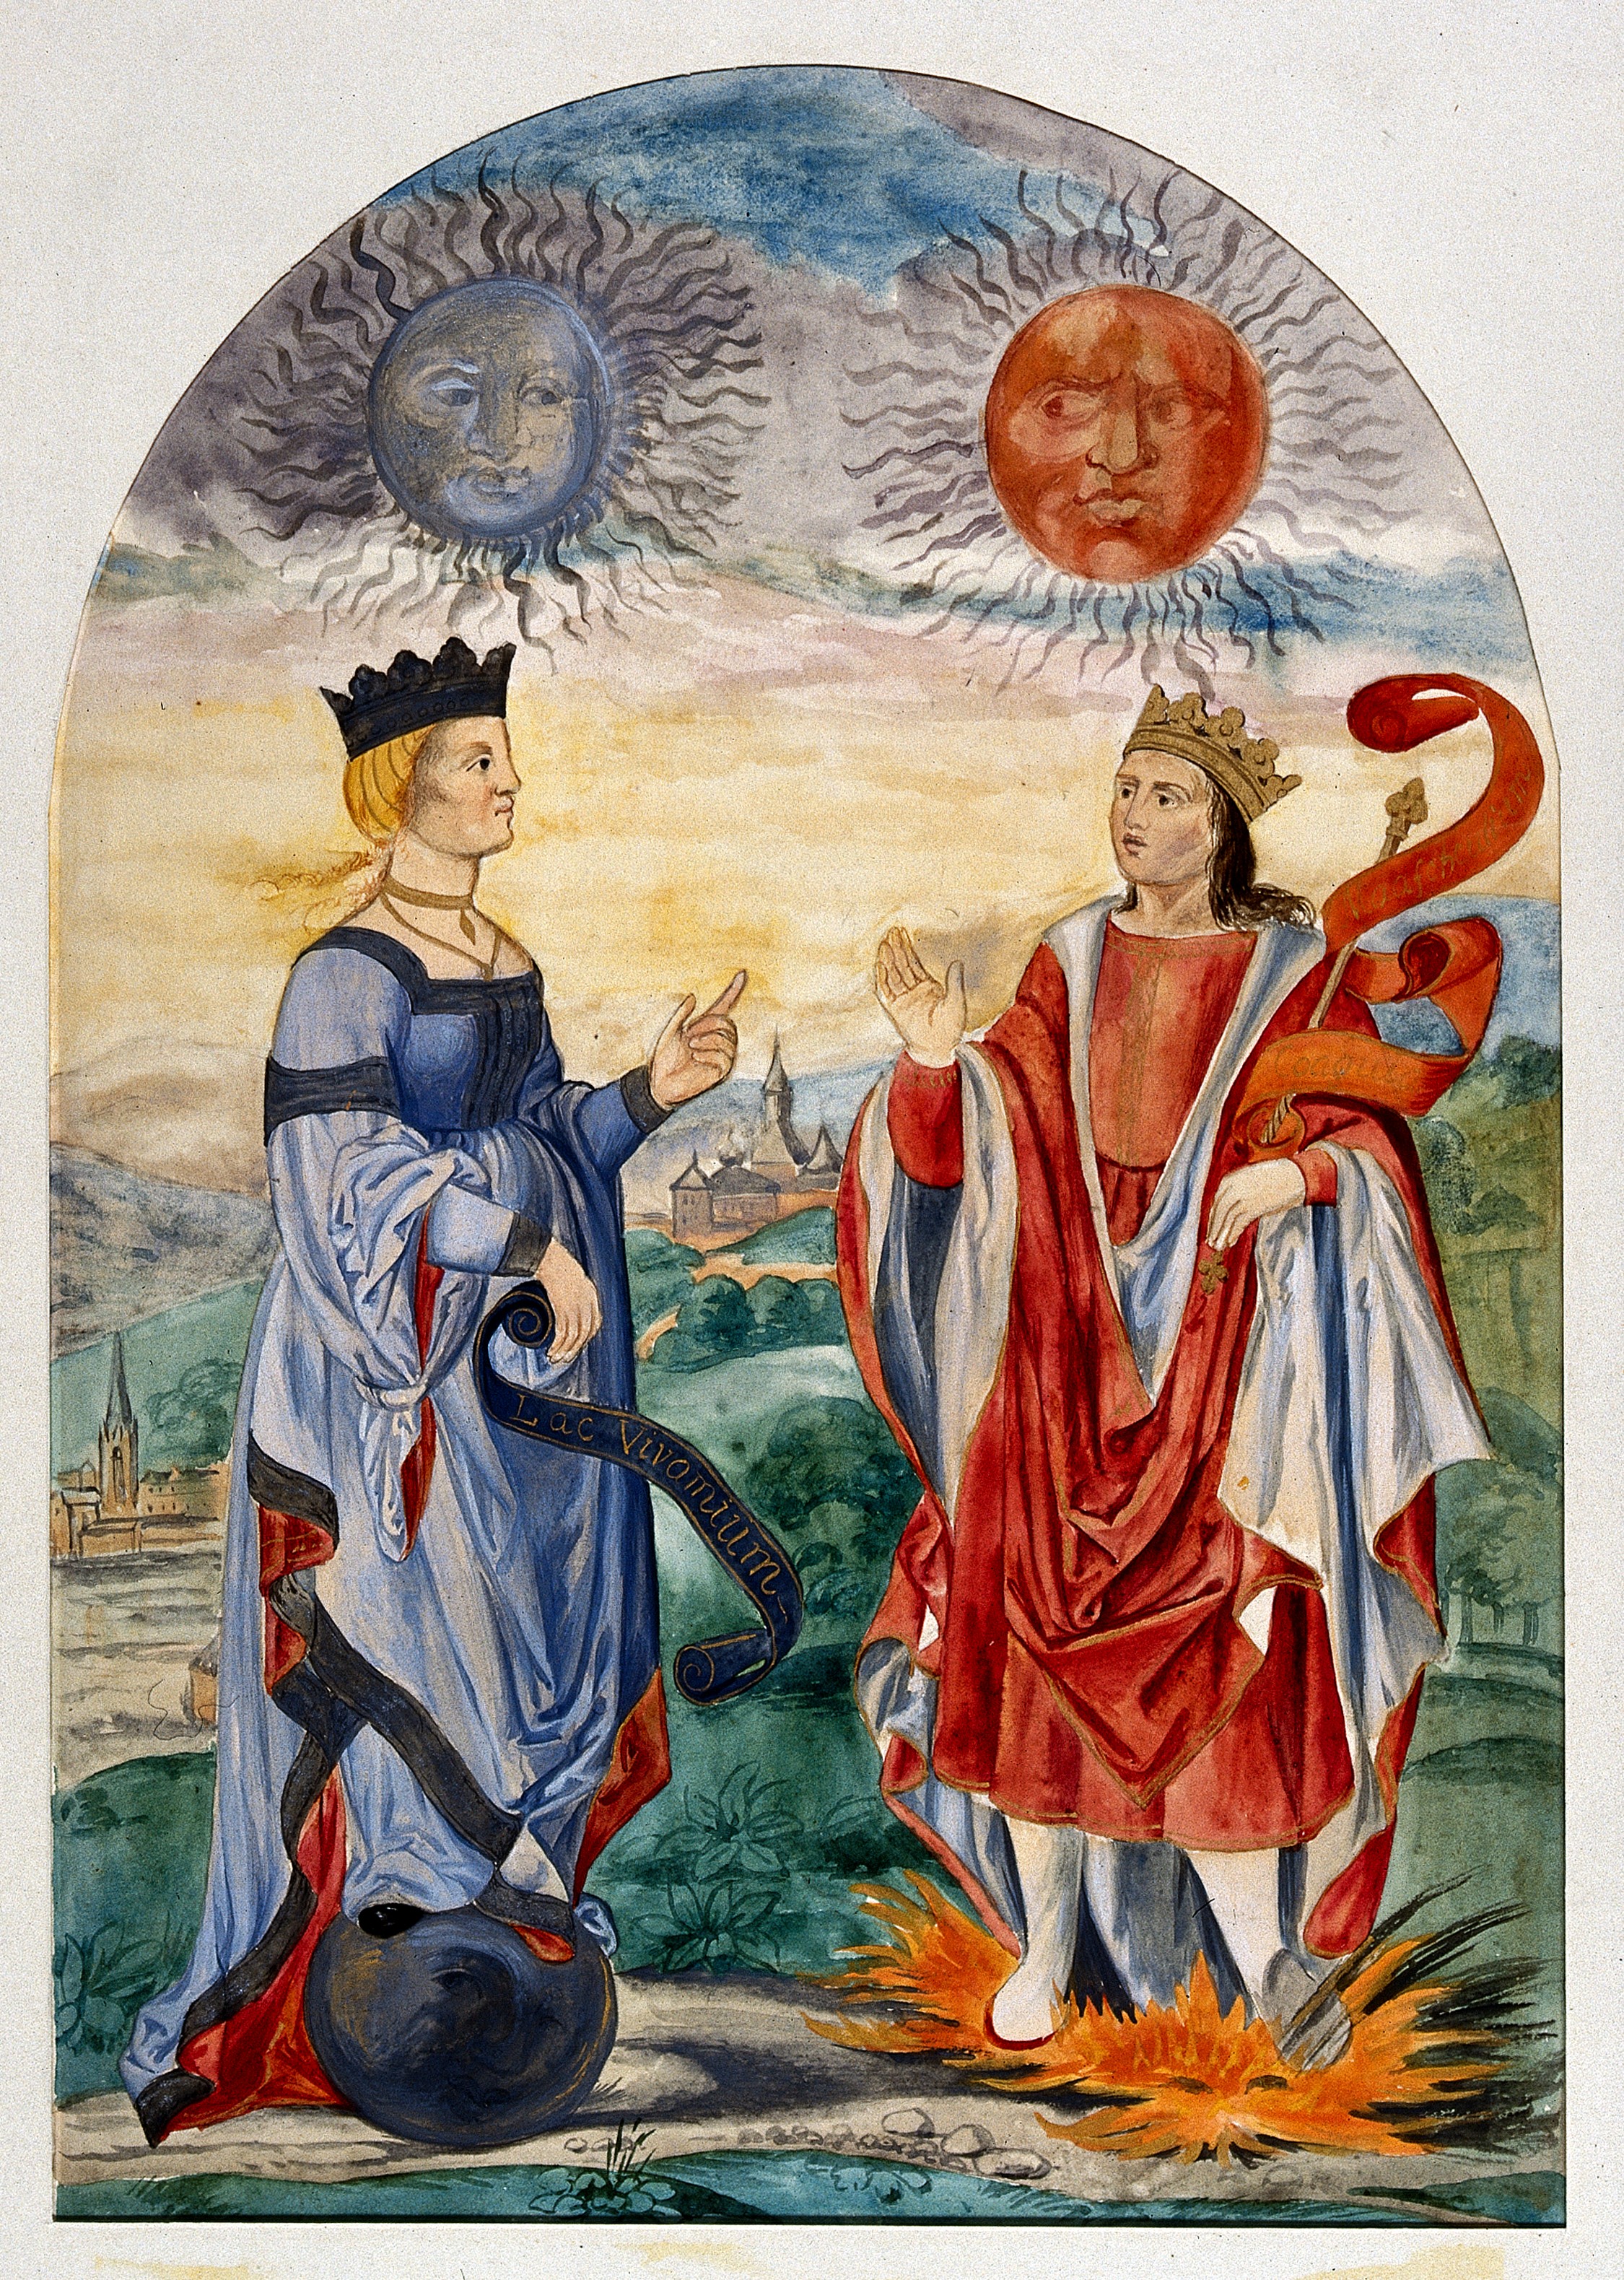 A moon above a queen dressed in blue and a sun above a king